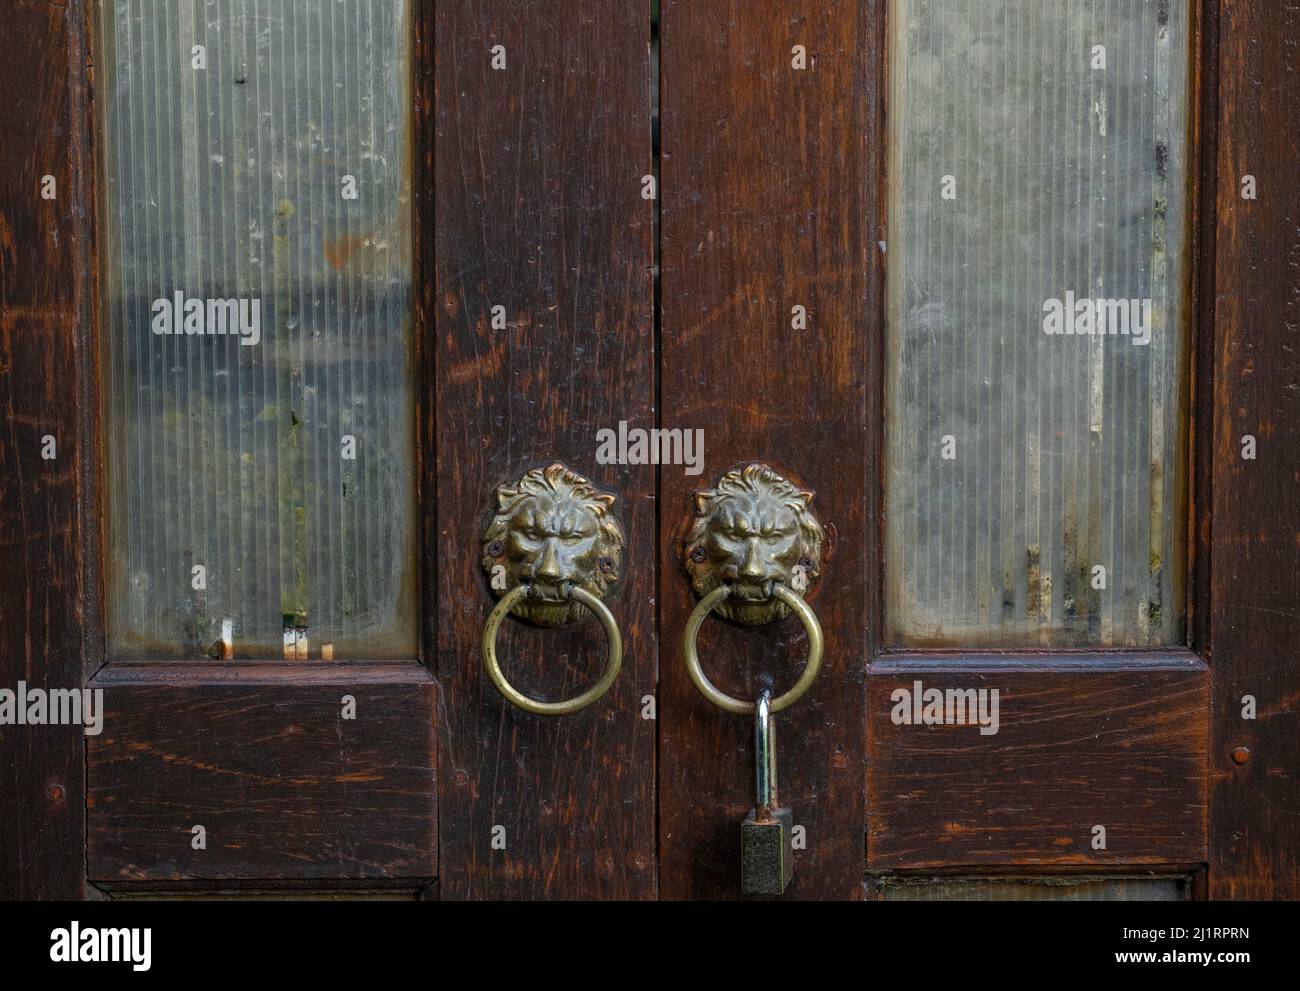 Isolated shot of brass ring handles on an old wooden and glass door in the shape of a lion heads and hanging a brass lock. Stock Photo